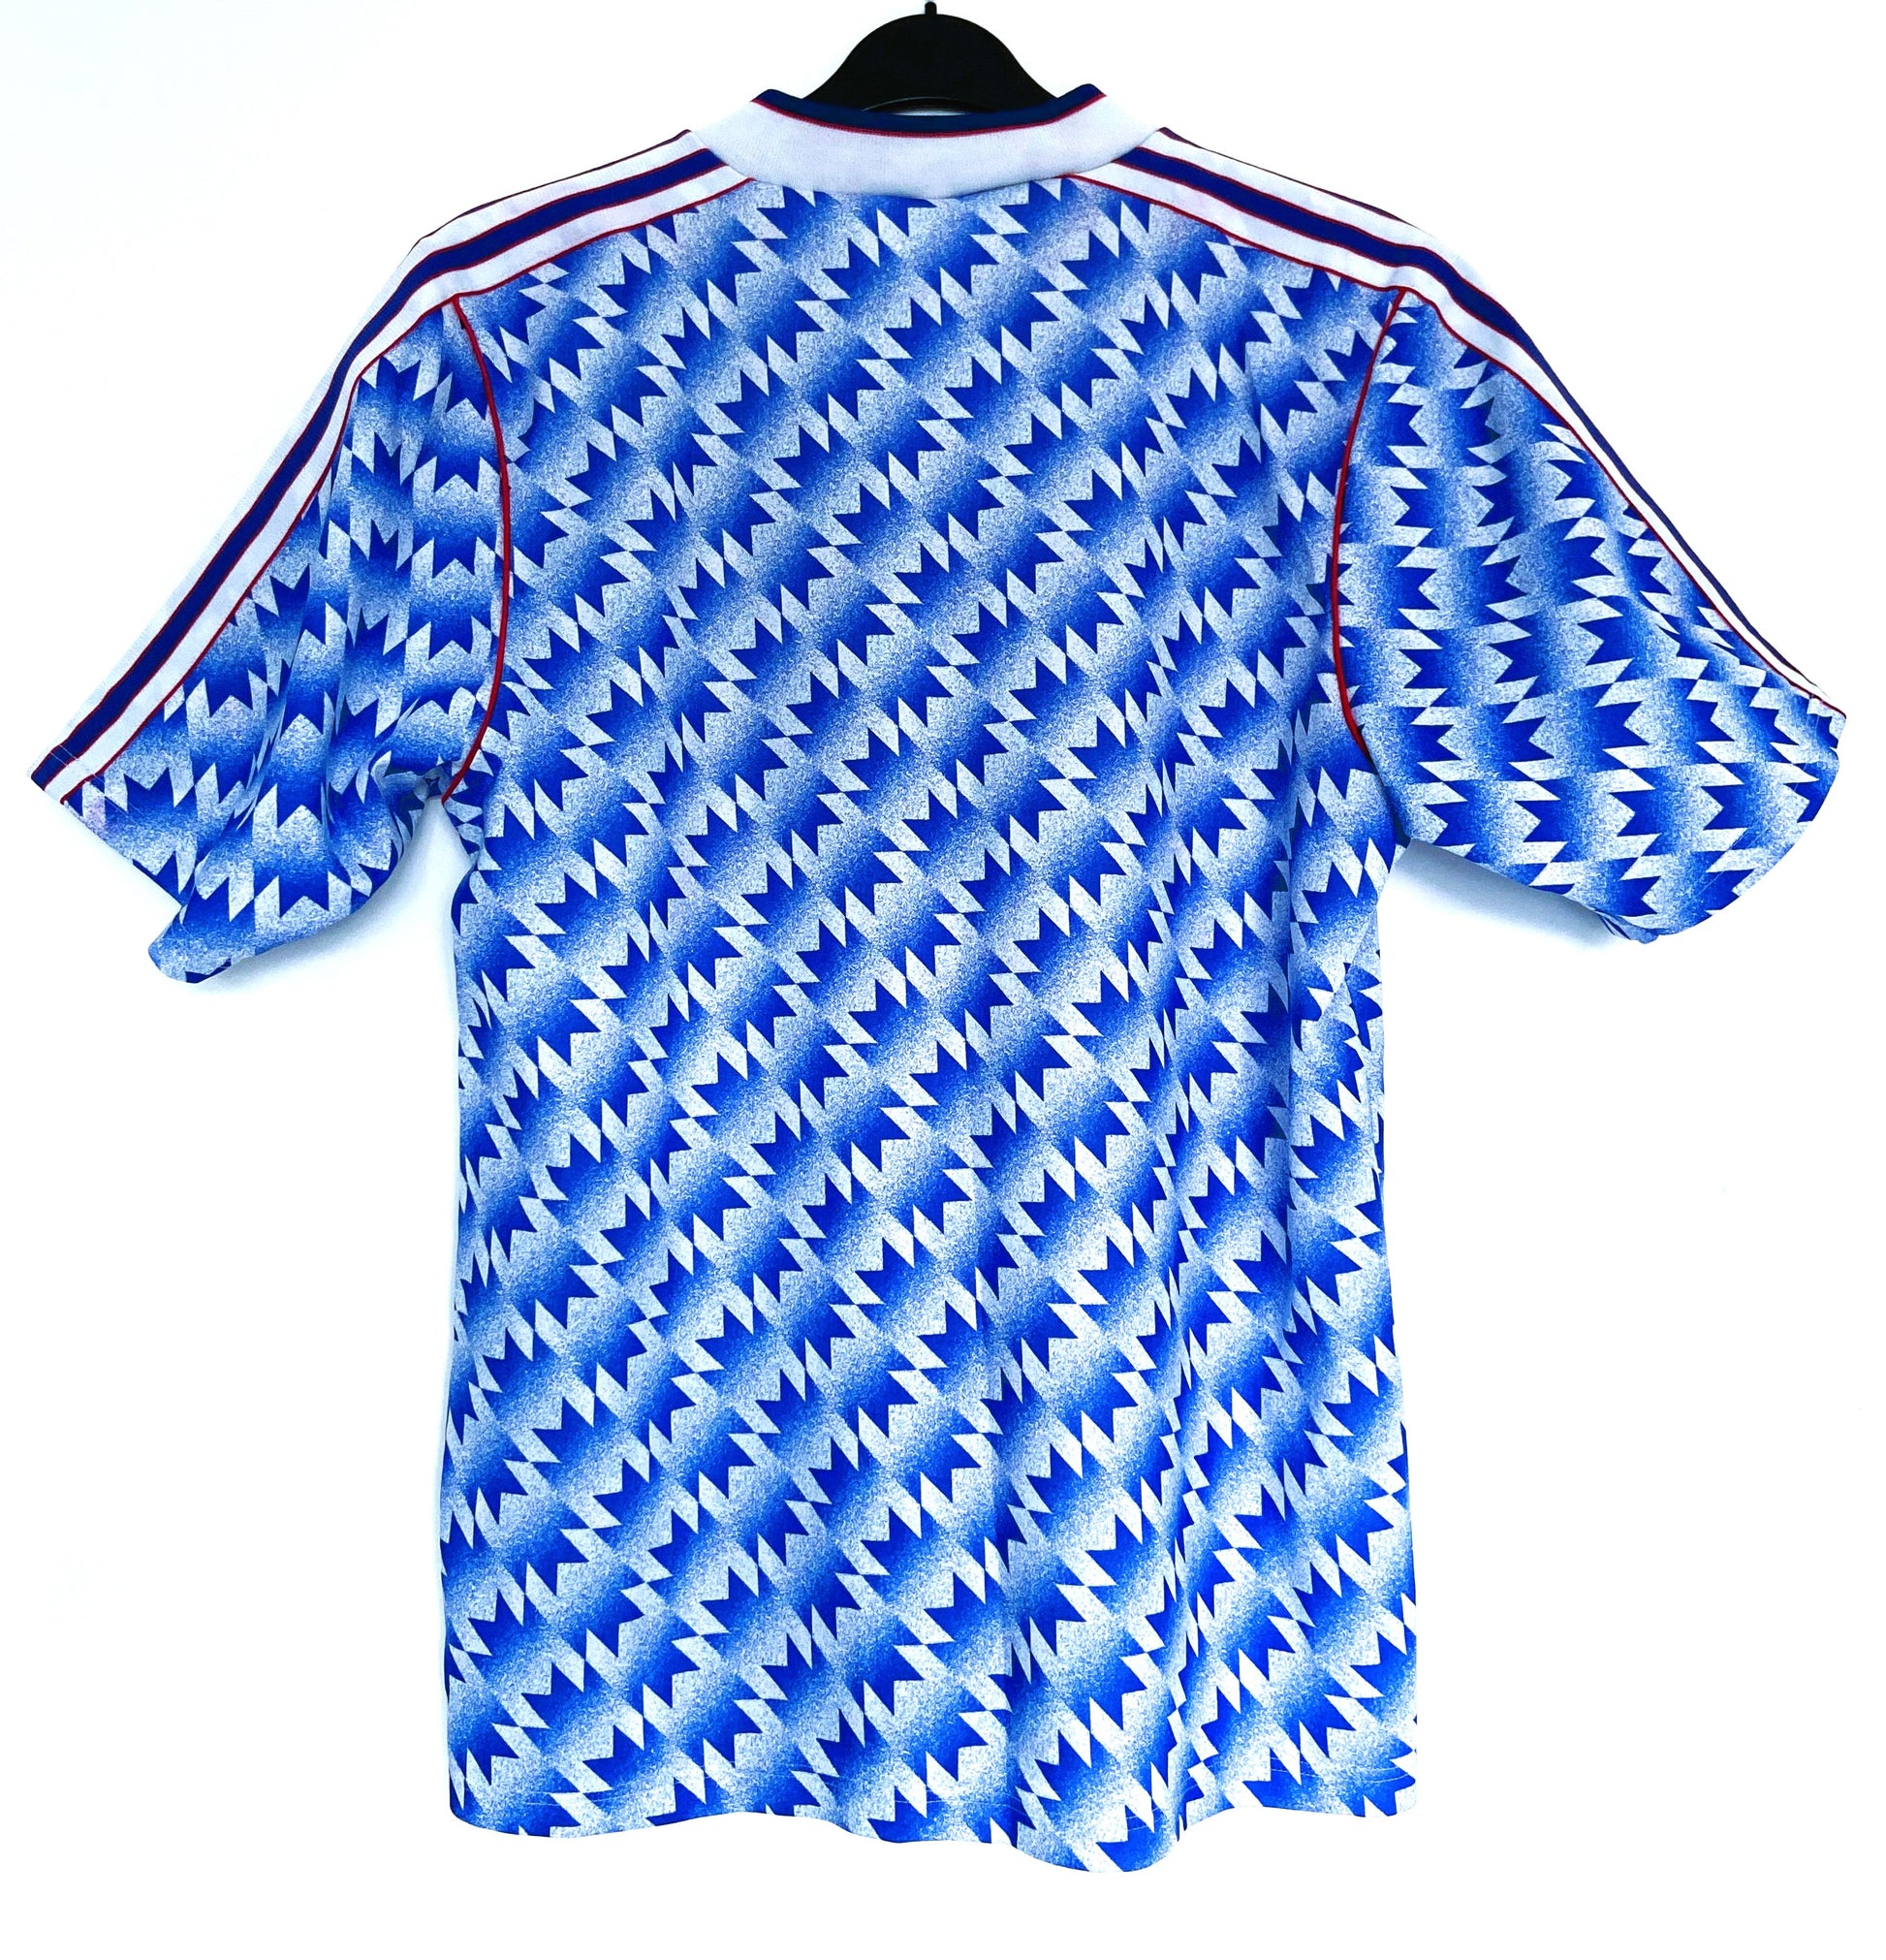 Manchester United 1990-92 Adidas Away Shirt, Maybe the most…